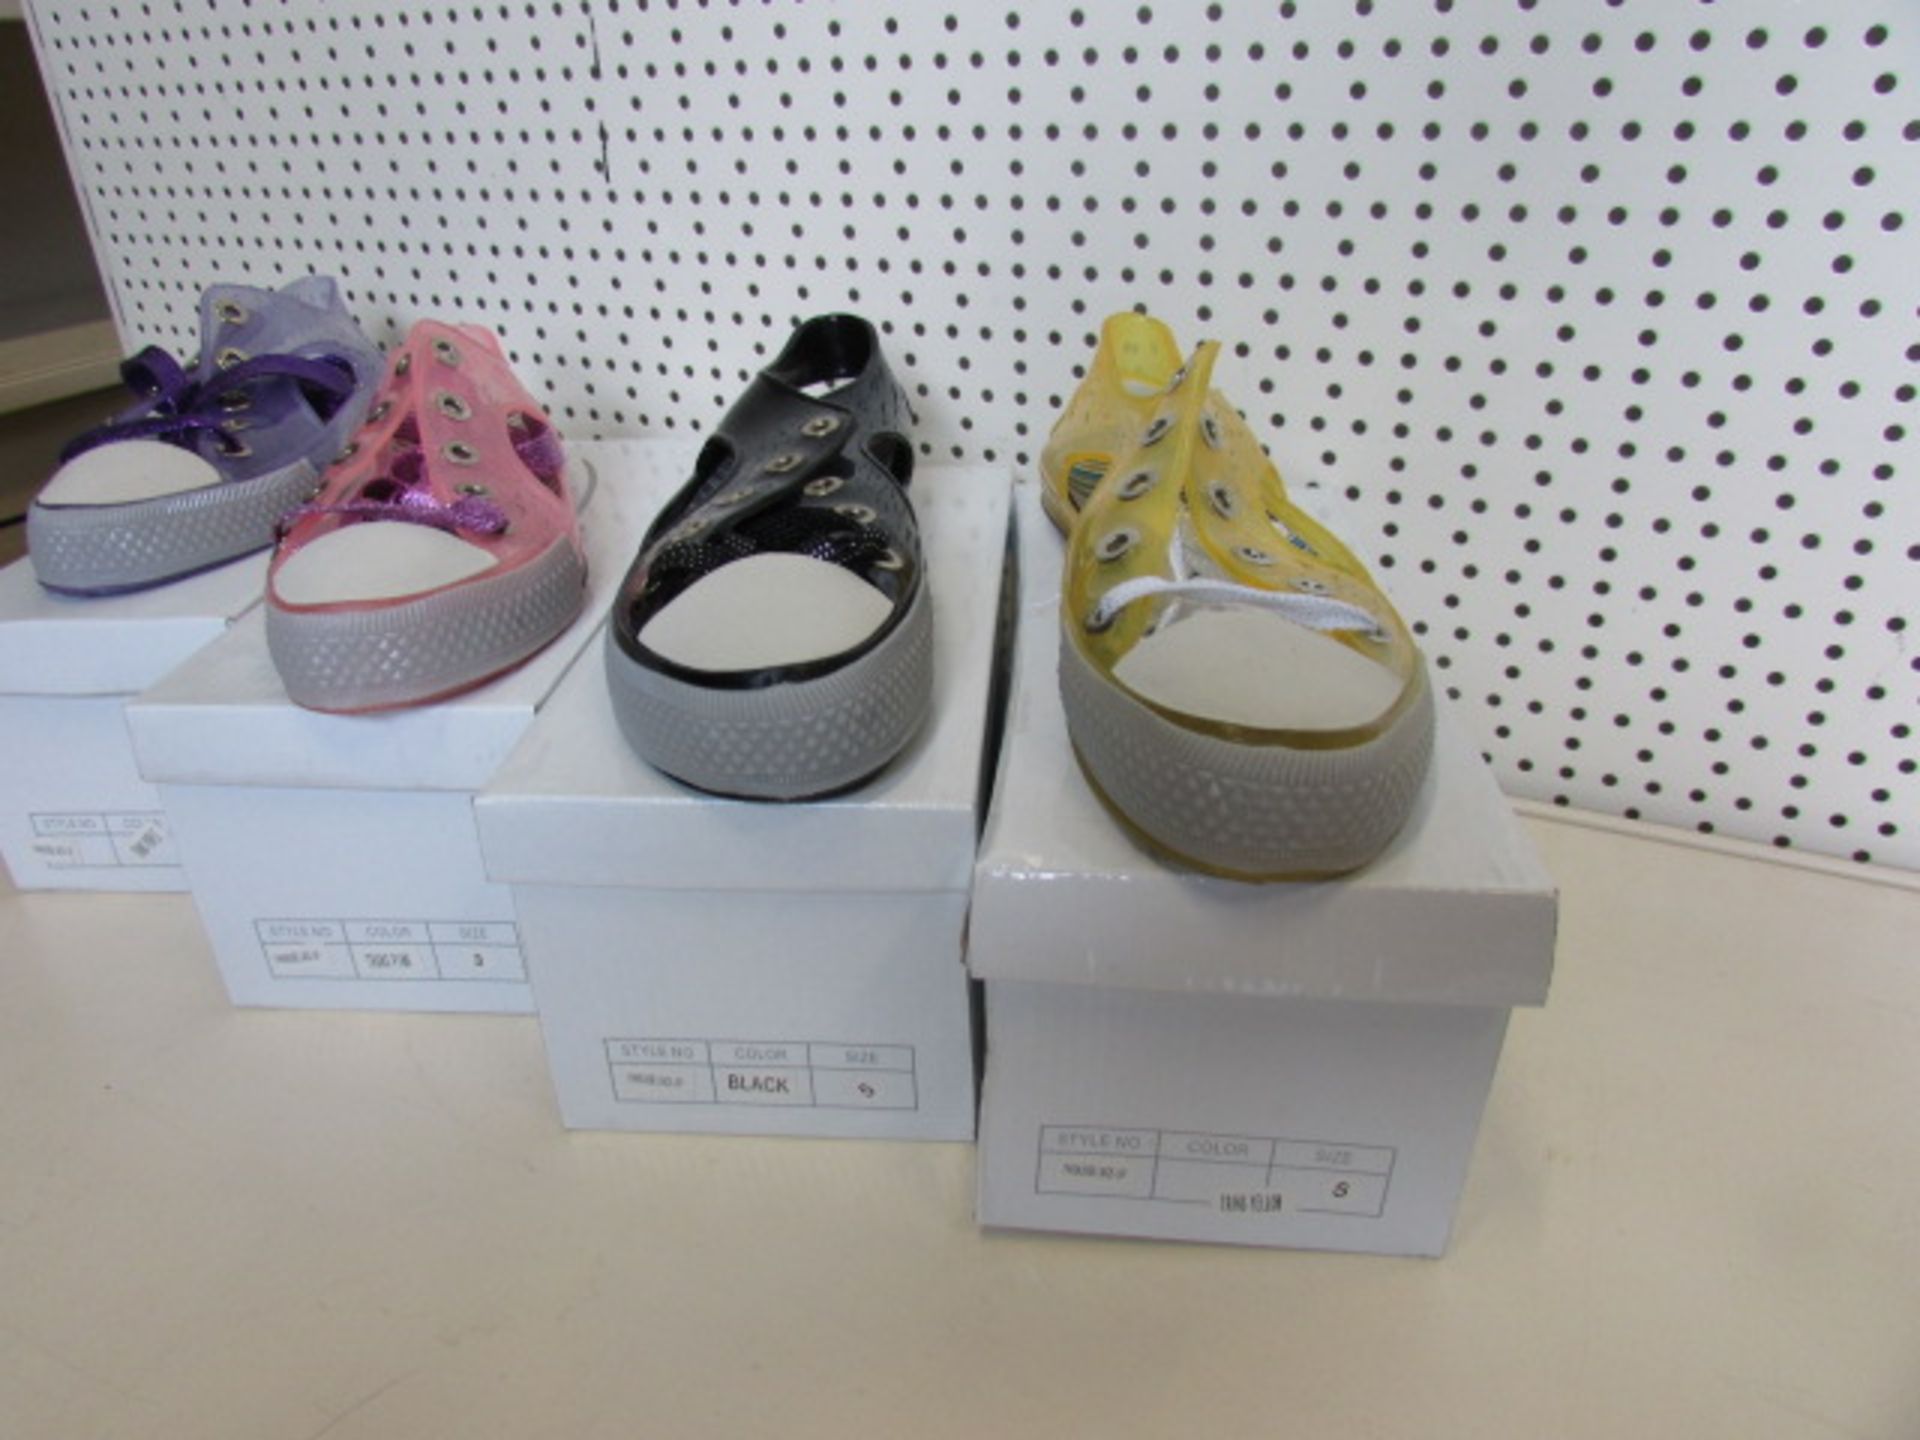 25 x Cyclone Paradise Lace Up Shoes In Various Sizes & Colours - Image 2 of 3